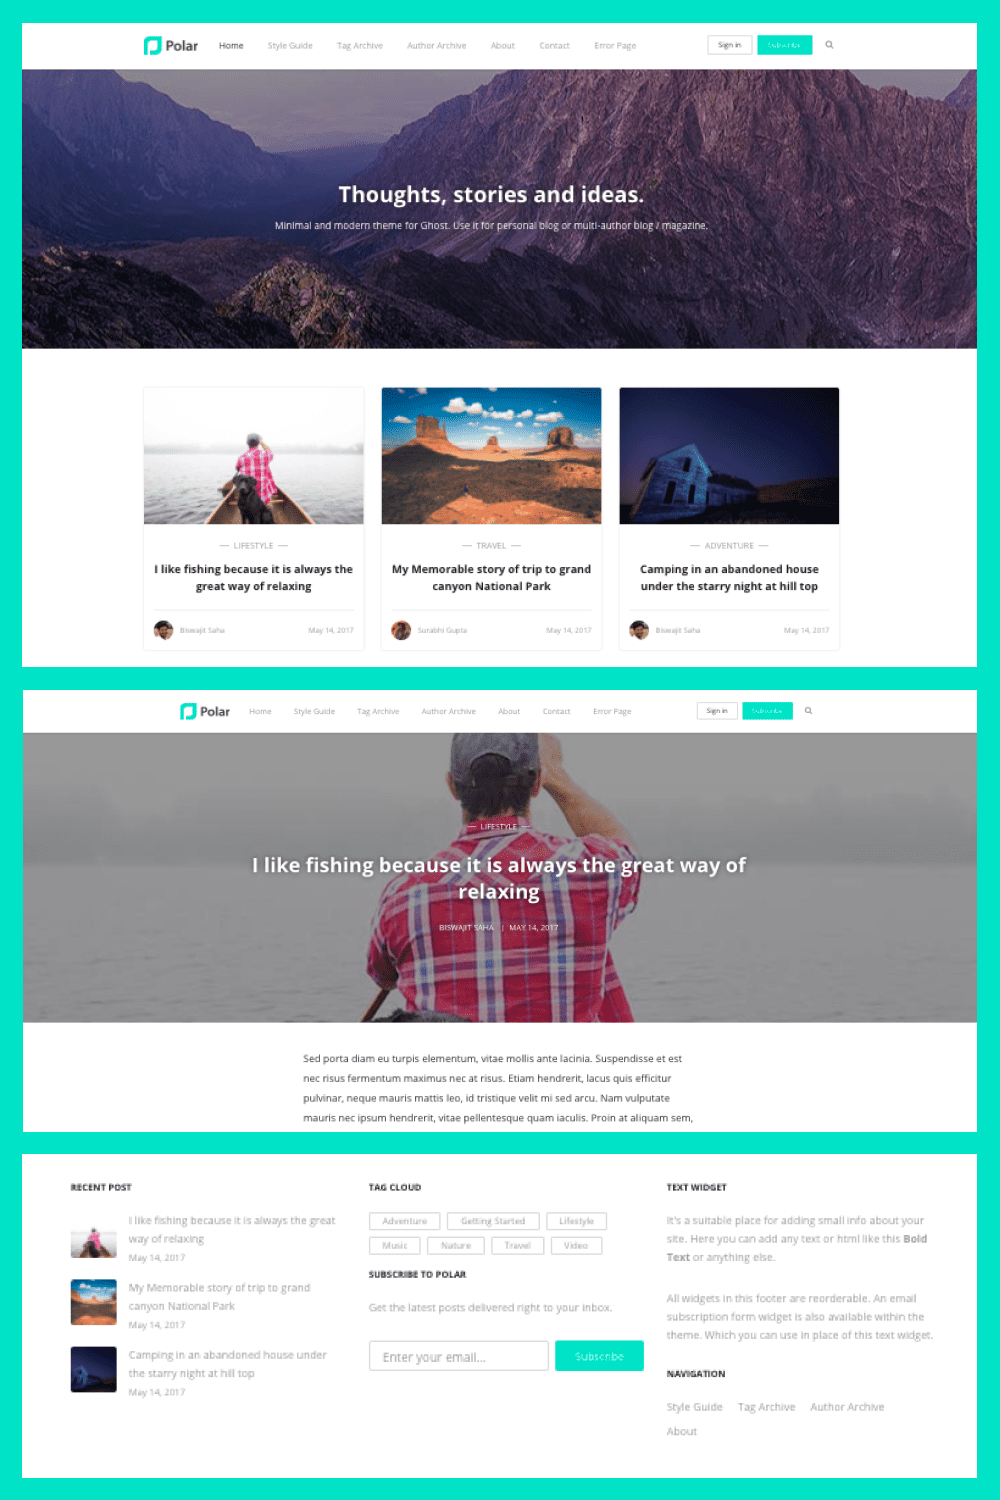 This is clean content focus theme for ghost blogging platform.